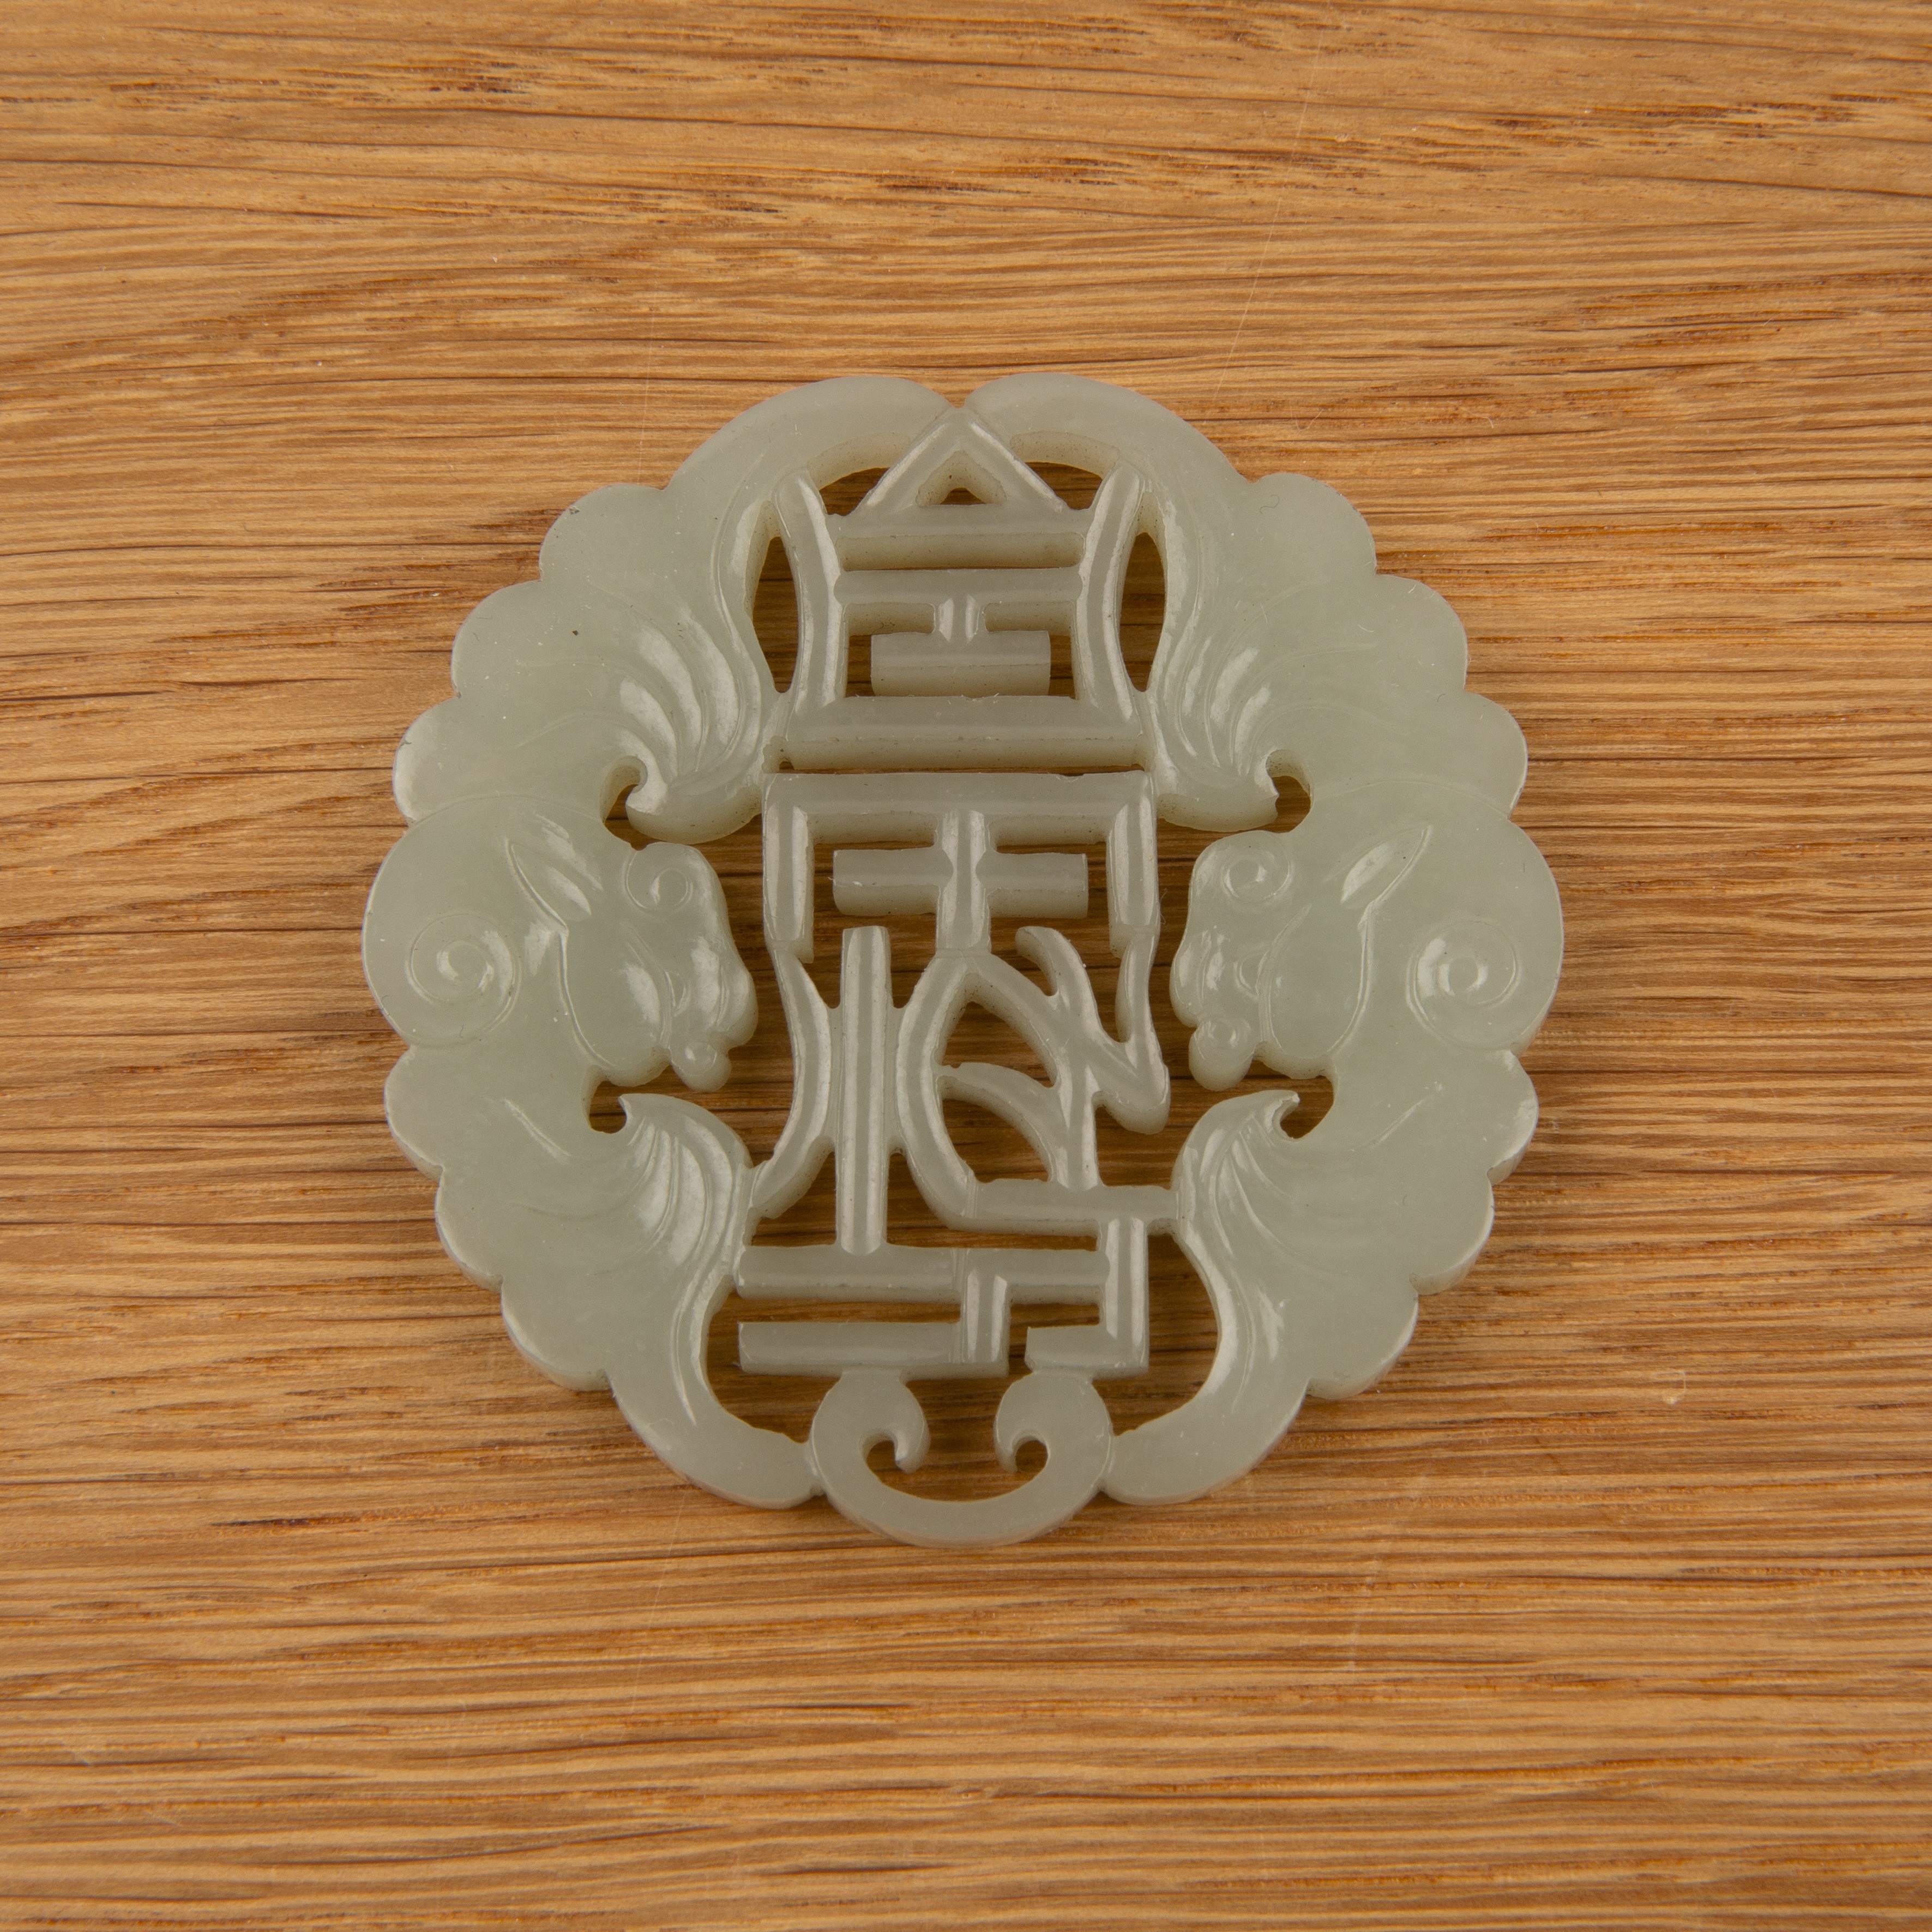 Carved white jade circular pendant Chinese, late 18th Century each side carved with two auspicious